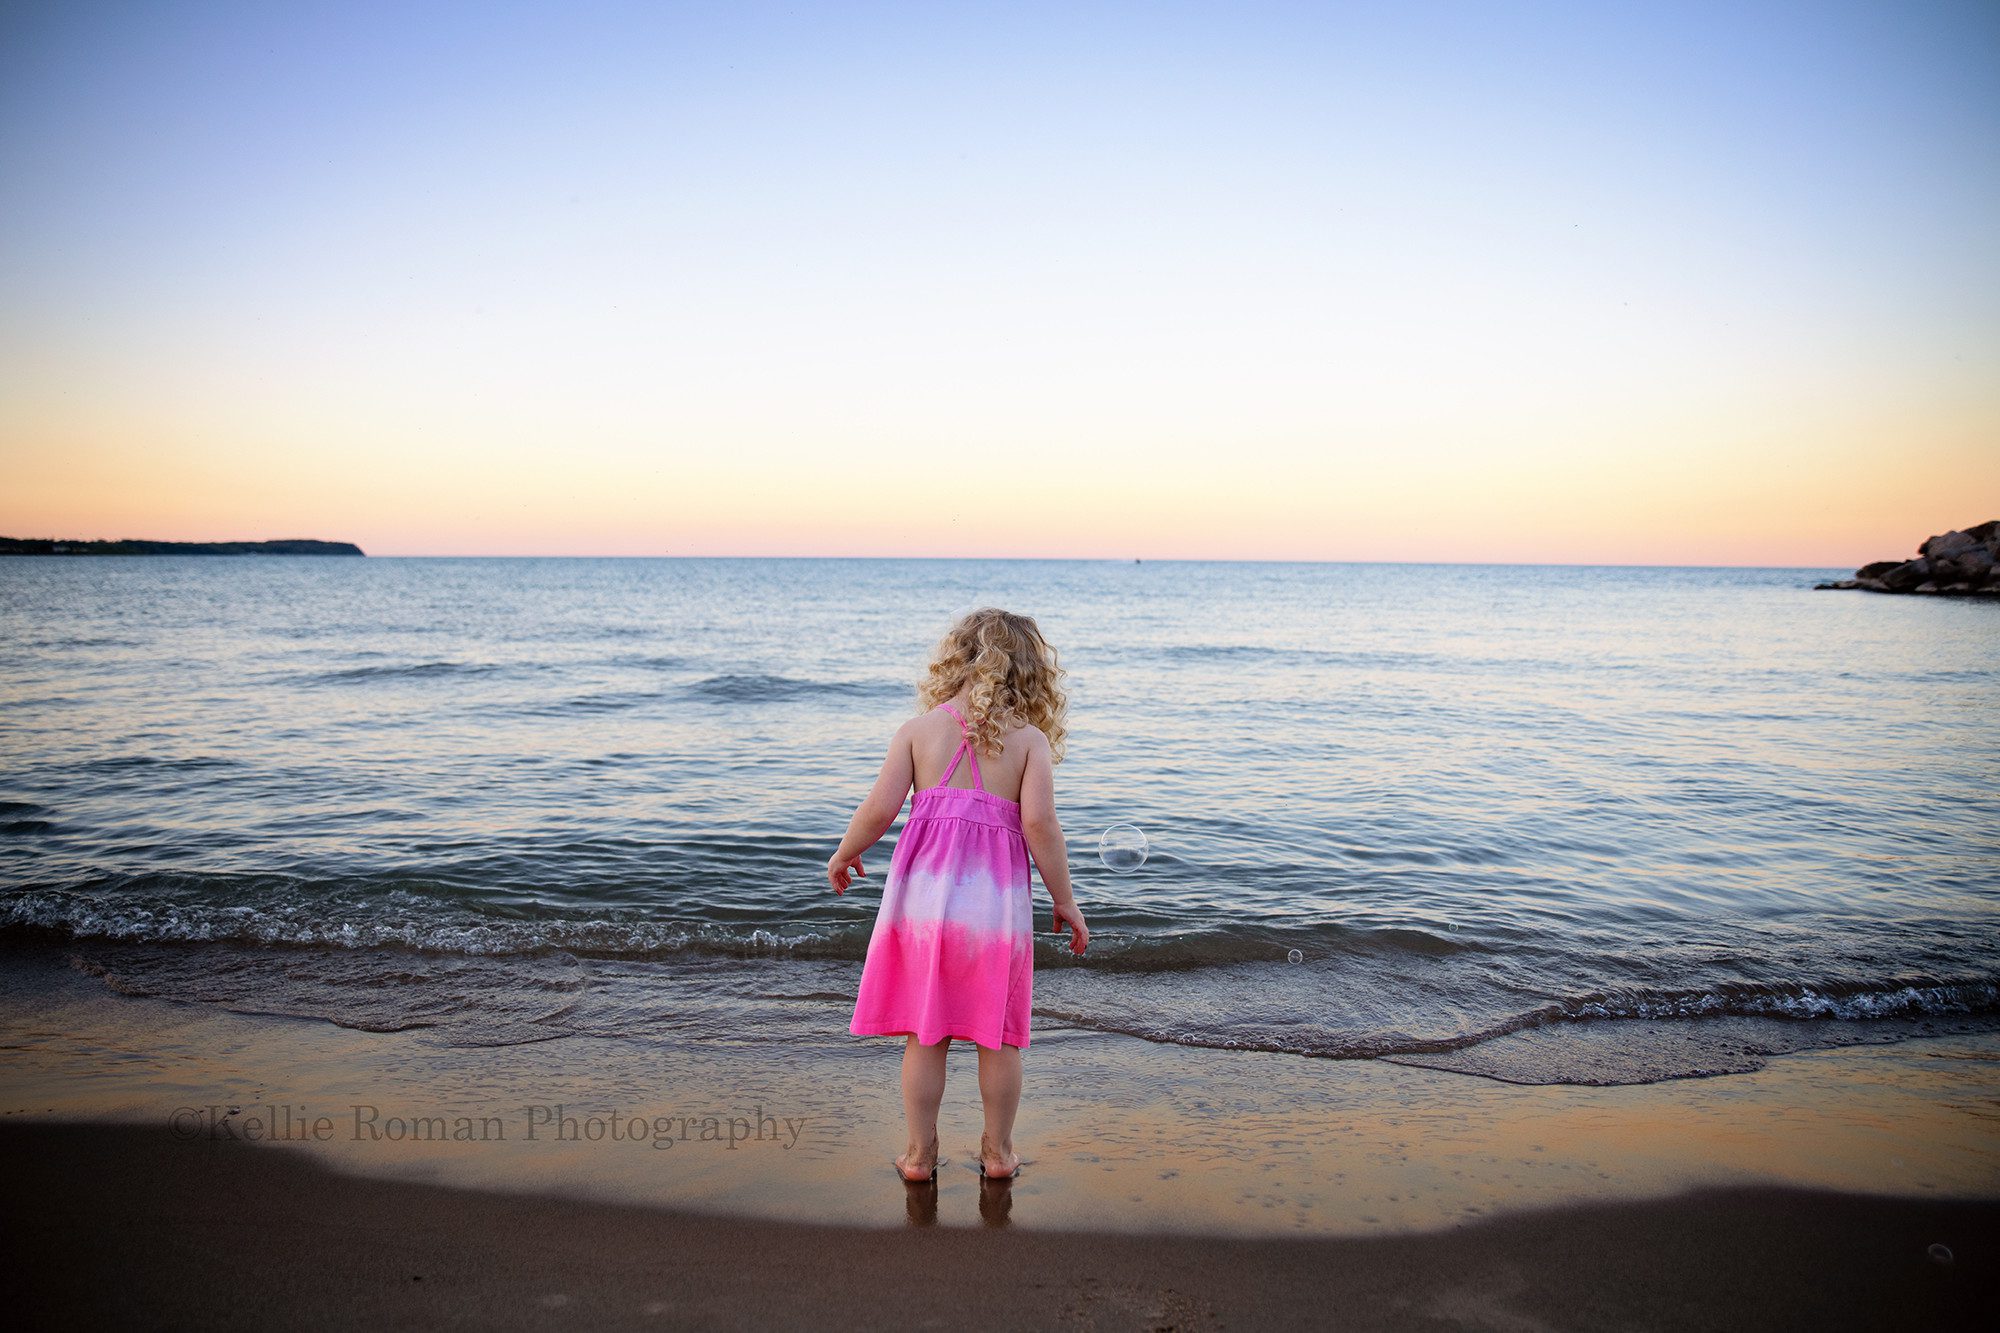 bubbles at the beach a three year old girl standing on a beach in milwaukee looking down at the water she has on a bright pink dress and has long curly blonde hair the sky and water are lit up with shades of pastel during sunset